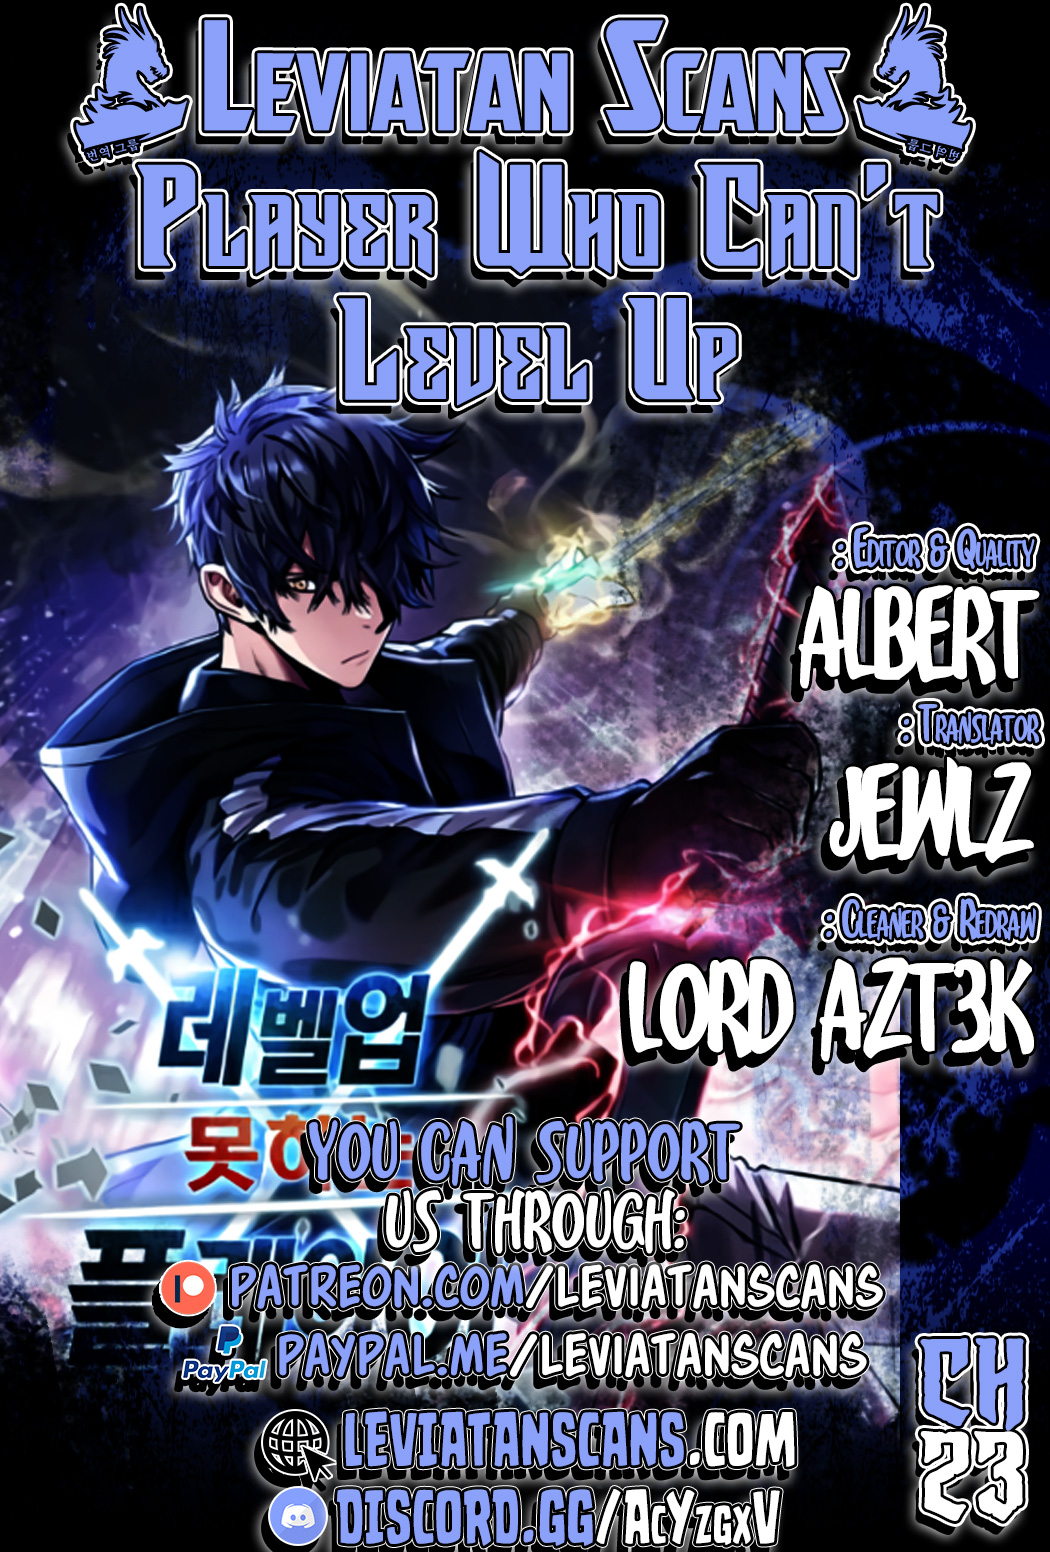 The Player That Can't Level Up - Chapter 2551 - Image 1